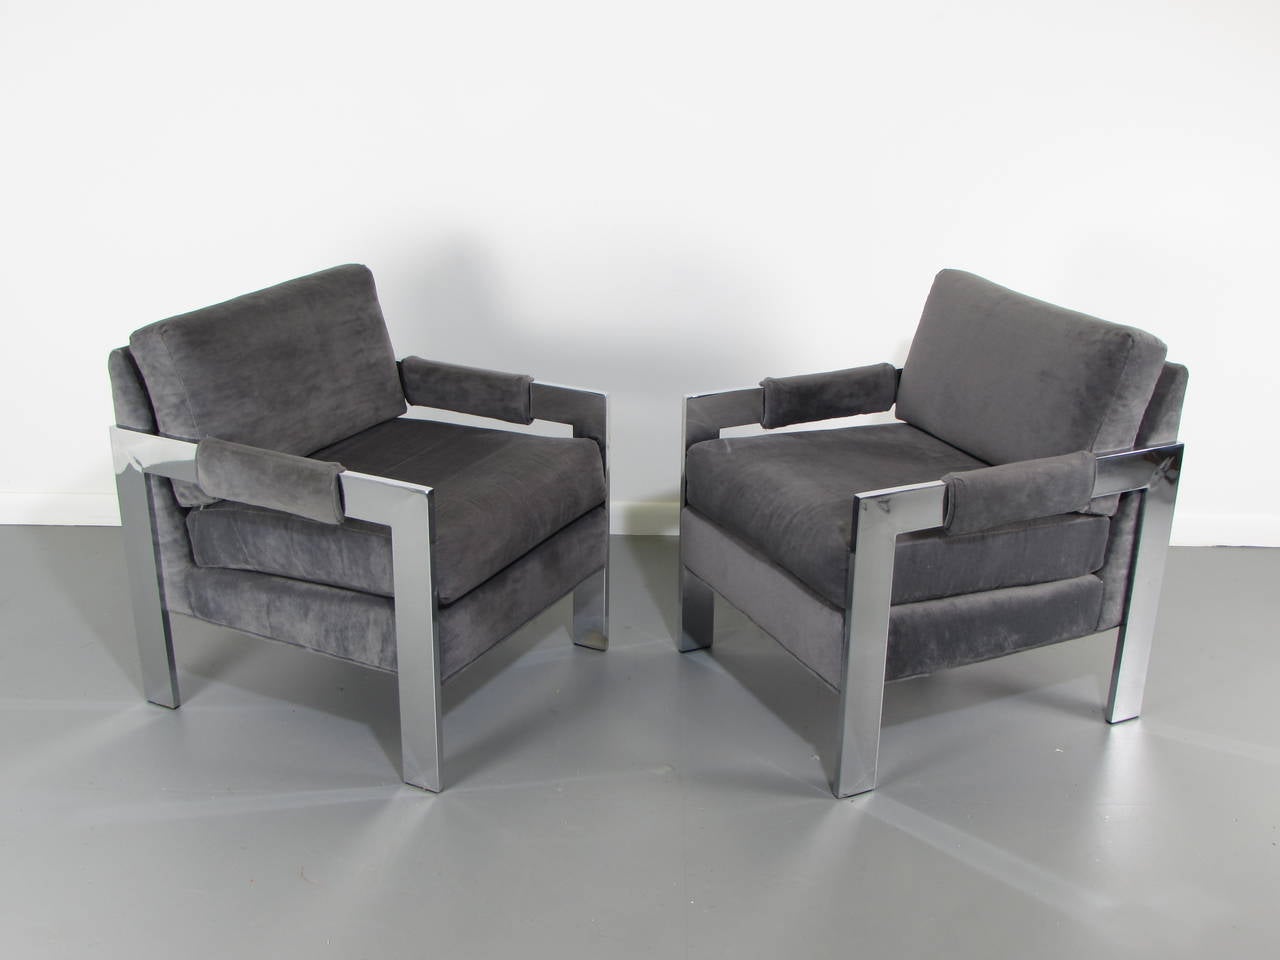 Pair of Glamorous Chunky Chrome 1970s Lounge Chairs. Stylish and comfortable with incredible chrome detail. Upholstery and chrome and in excellent vintage condition with normal wear. 

We offer free regular deliveries to NYC and Philadelphia area.